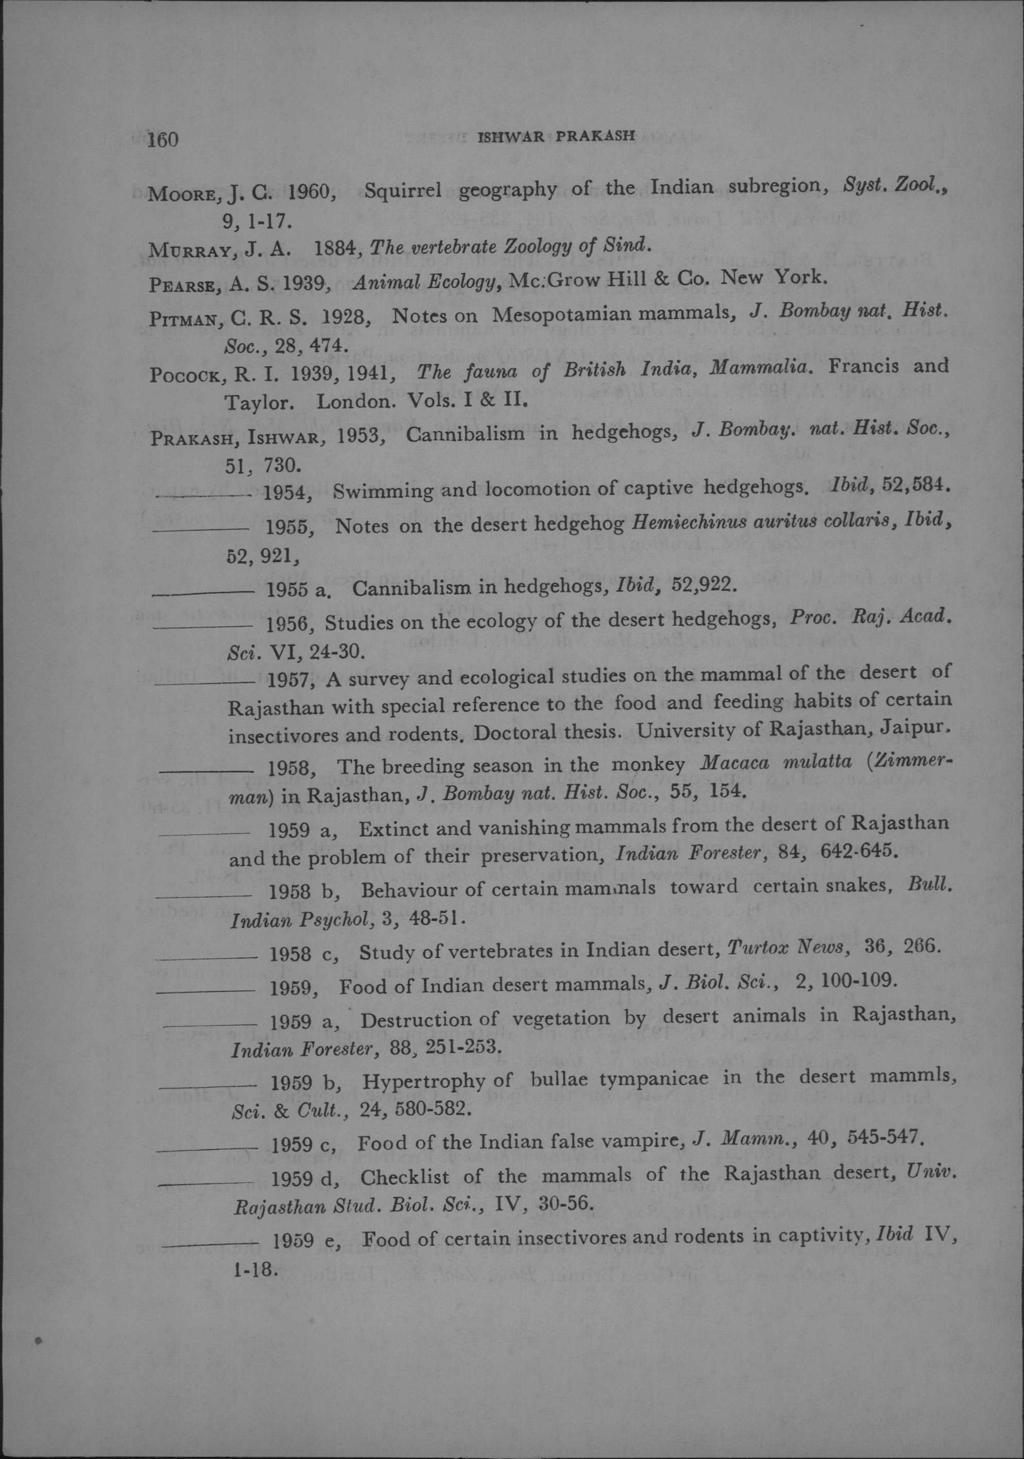 160 ISHW:ARPRAKASH M00RE,j. C. 1960, Squirrel geography of the Indian subregion, Syst. Zool., 9, 1-l7. MURRAY,J. A. 1884, The vertebrate Zoology of Sind. PEARSE,A. S. 1939, Animal Ecology, Mc:Grow Hill & Co.